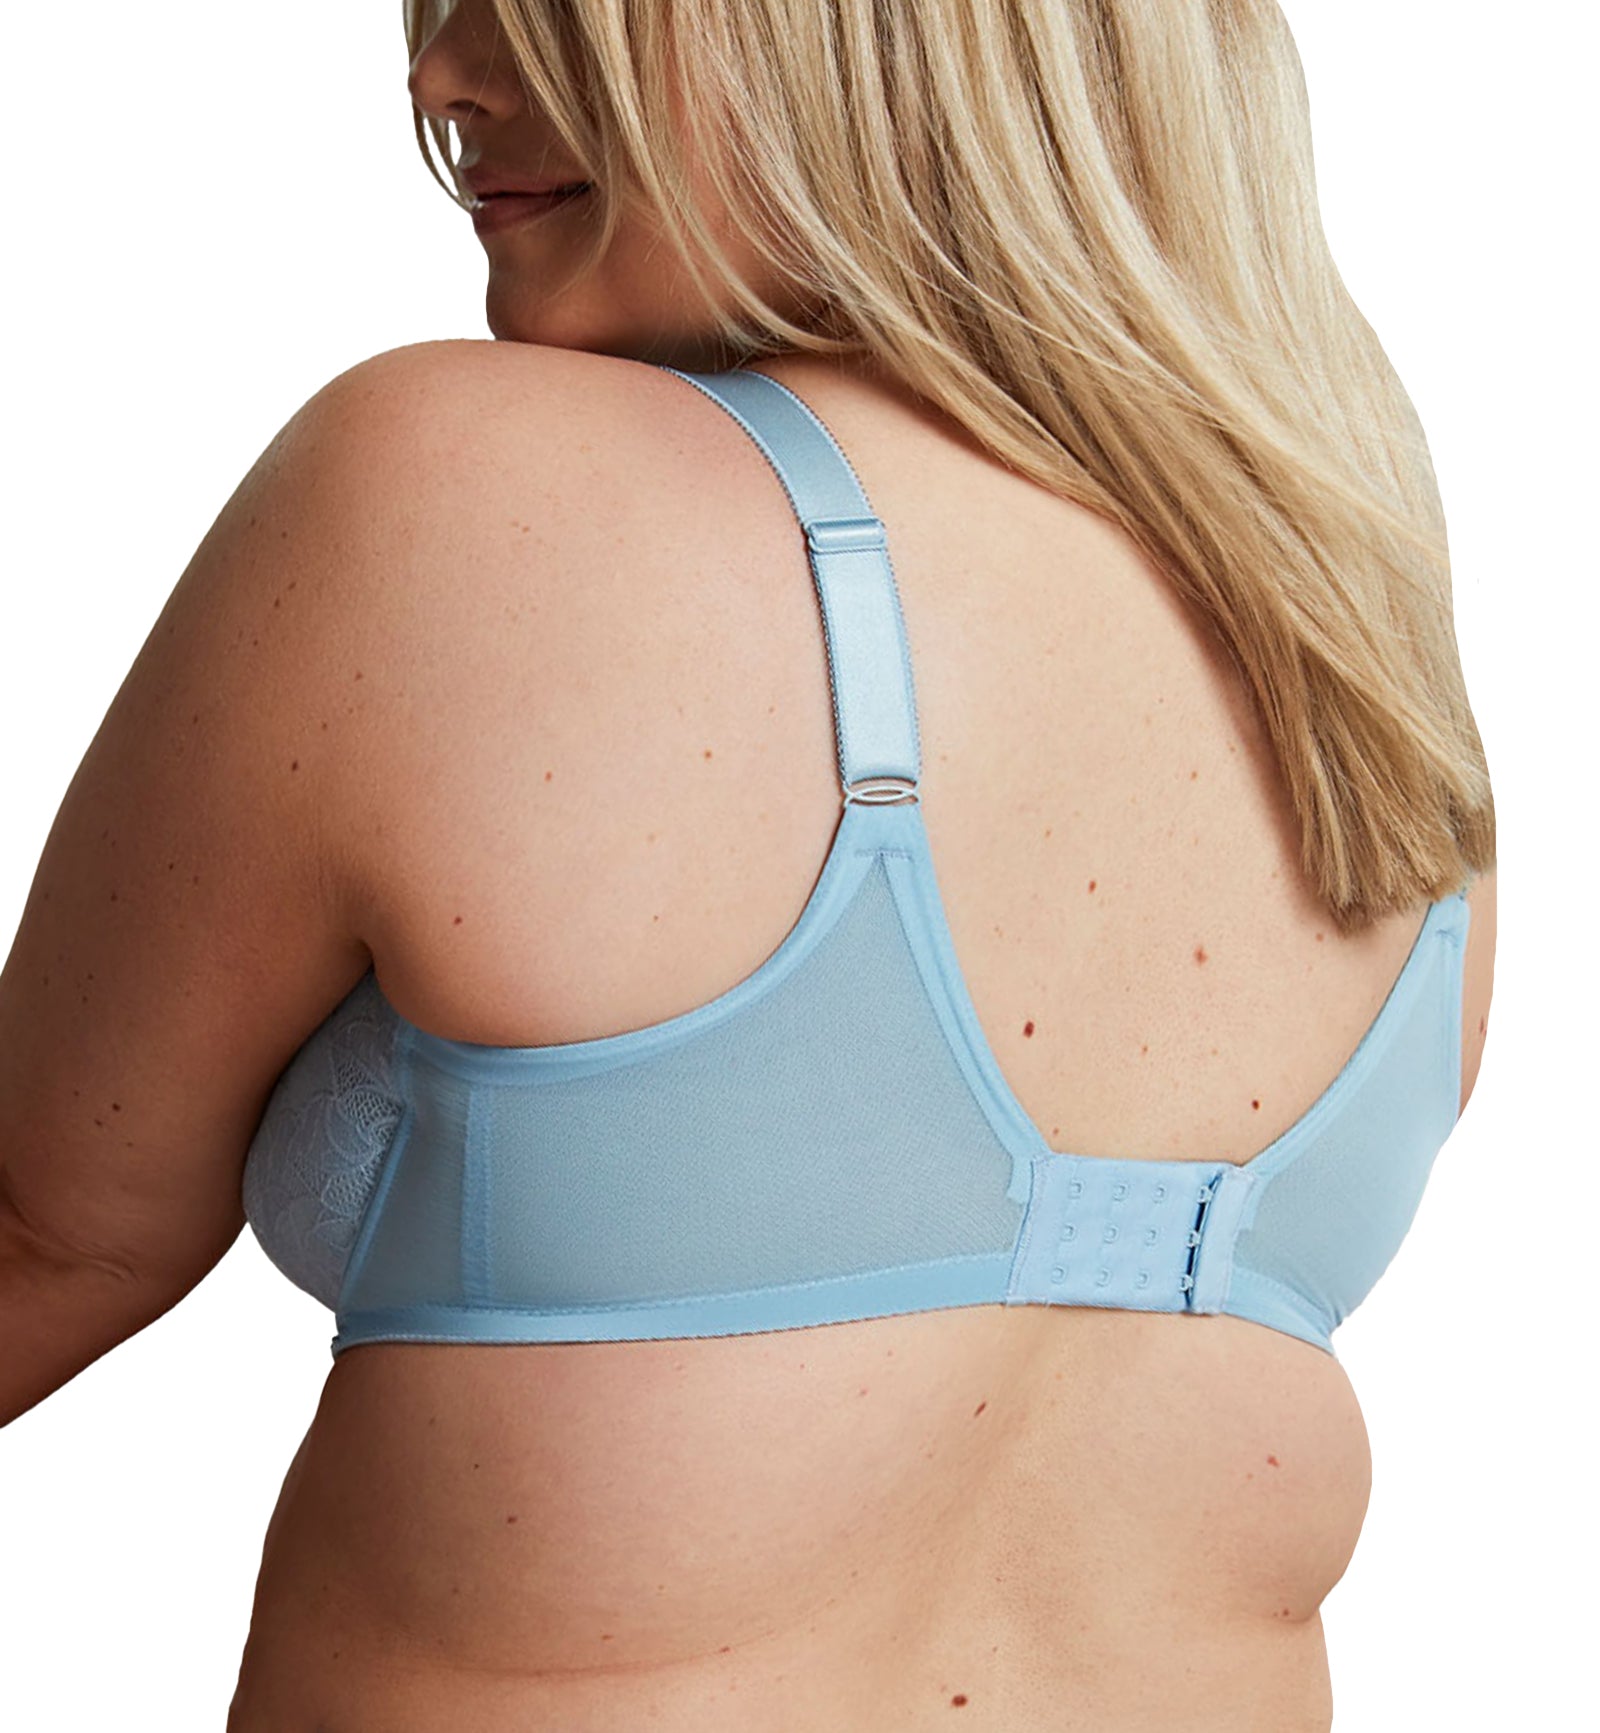 Breakout Bras - Our tagline is Fitter Approved